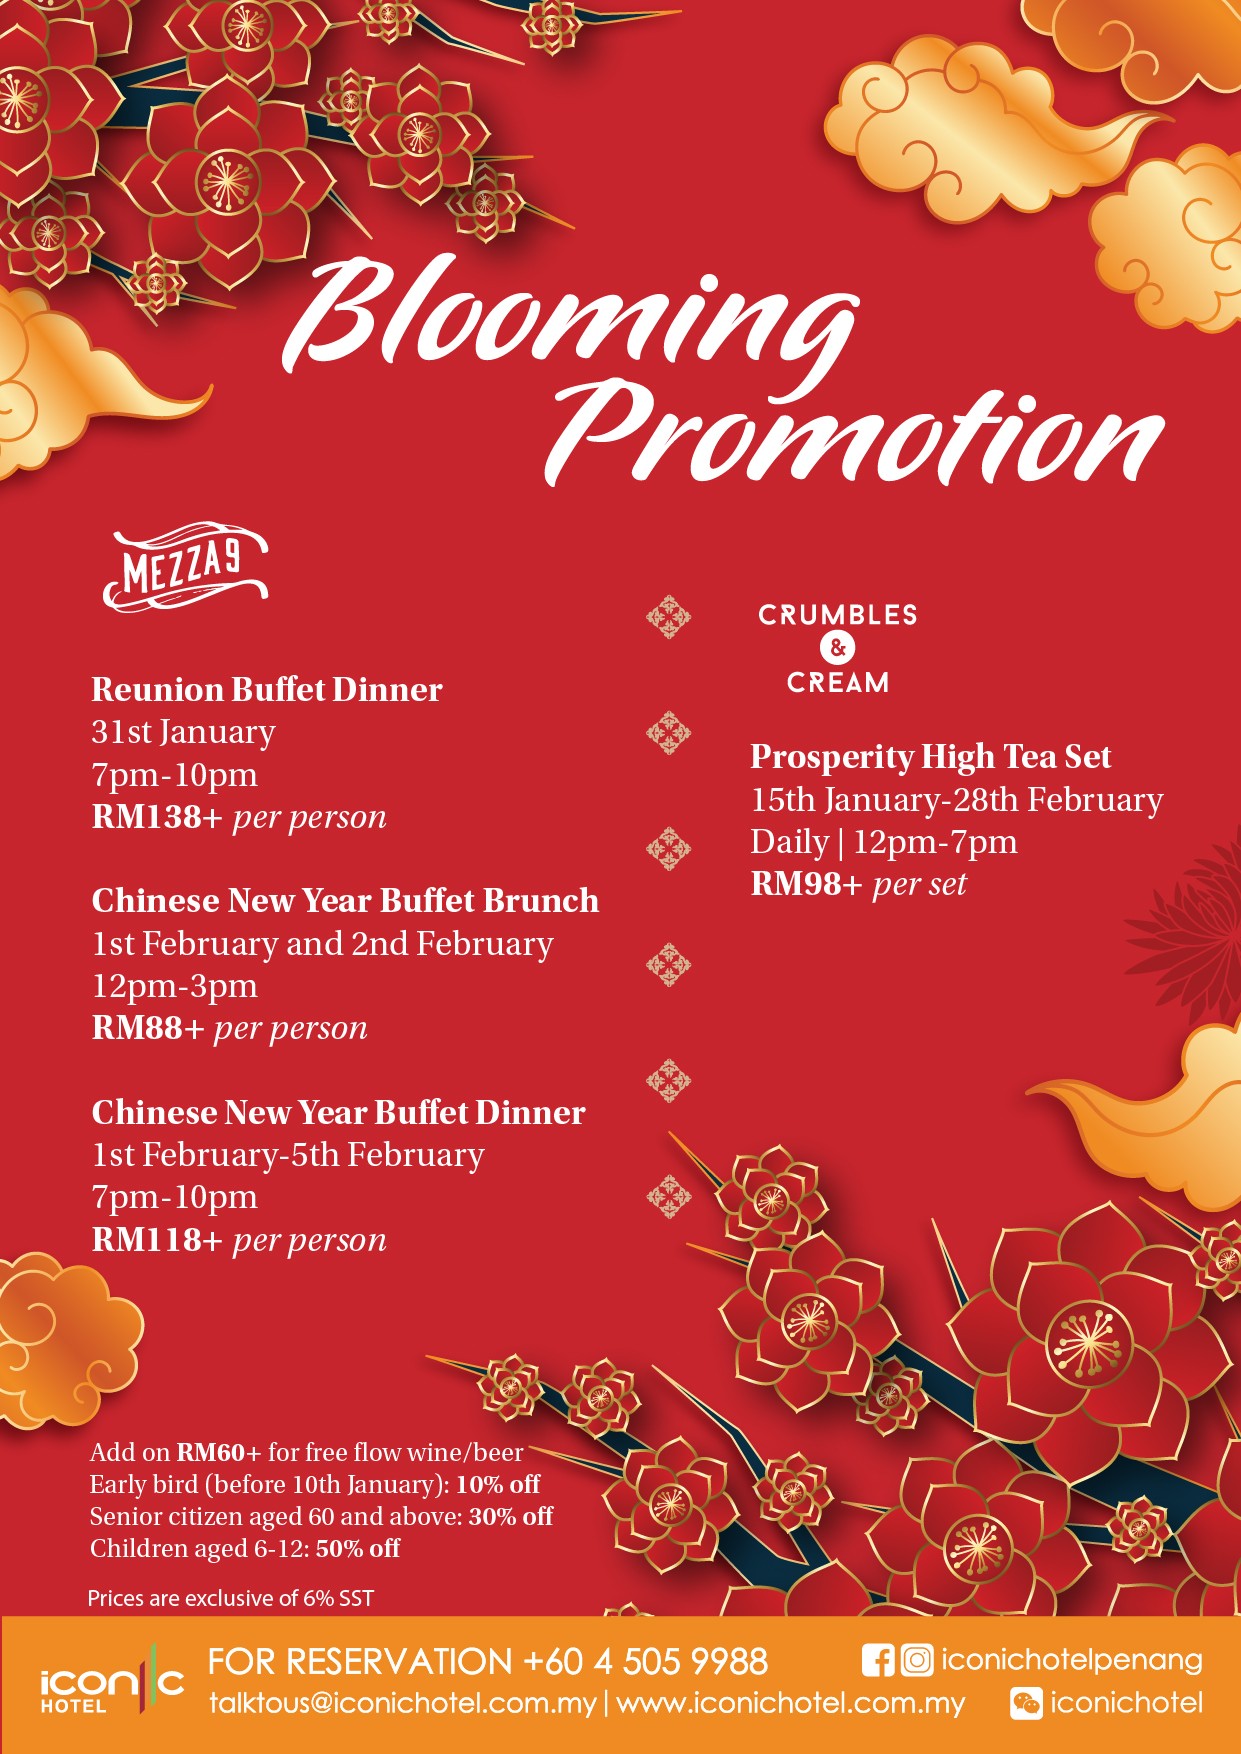 Blooming promotion by Iconic Hotel